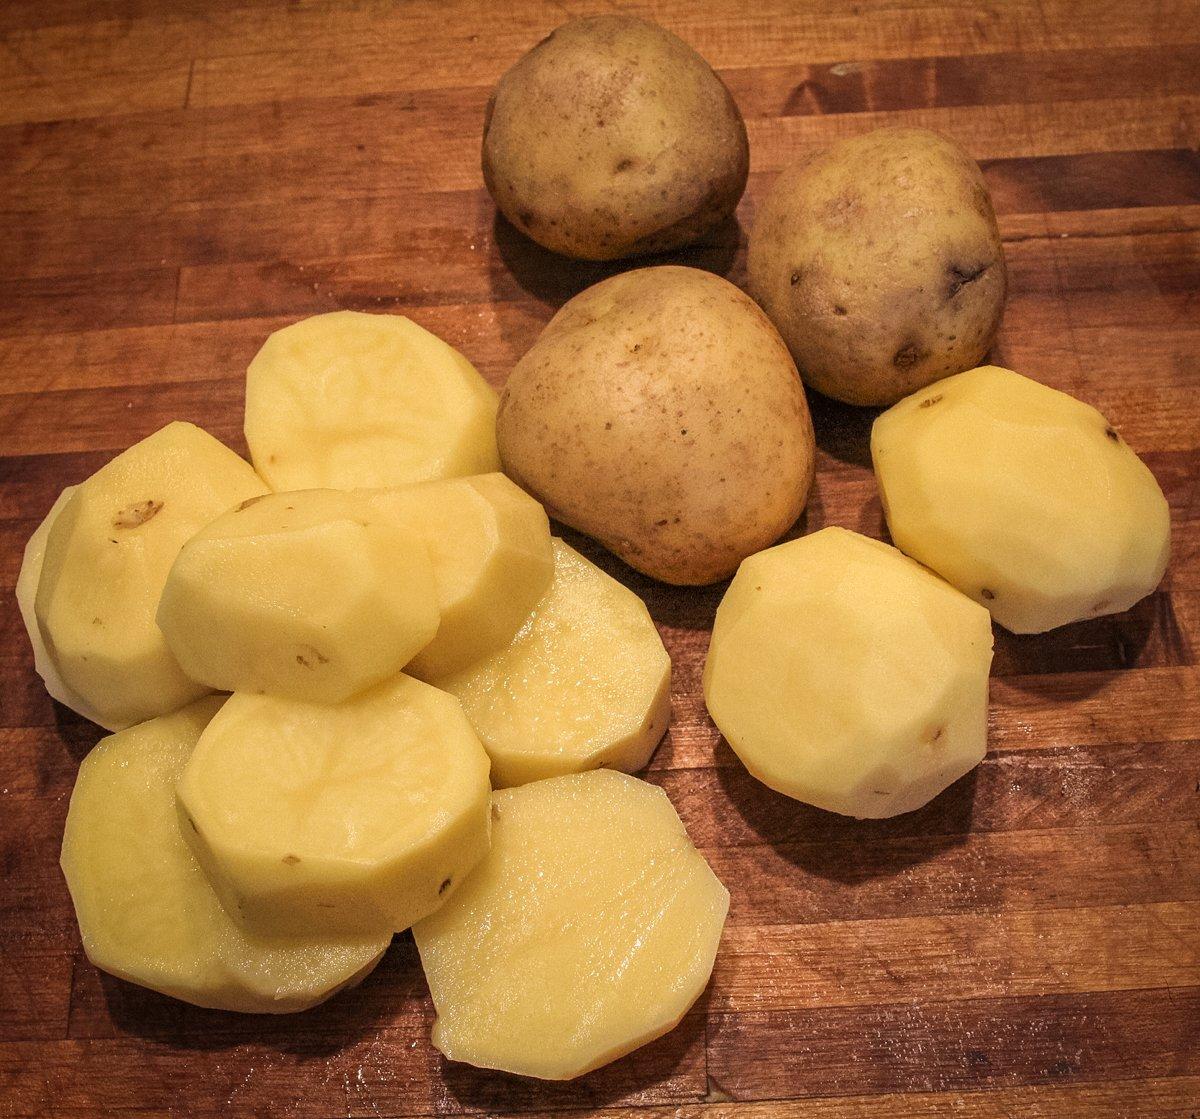 Peel the Yukon Gold potatoes then slice into thick rounds.